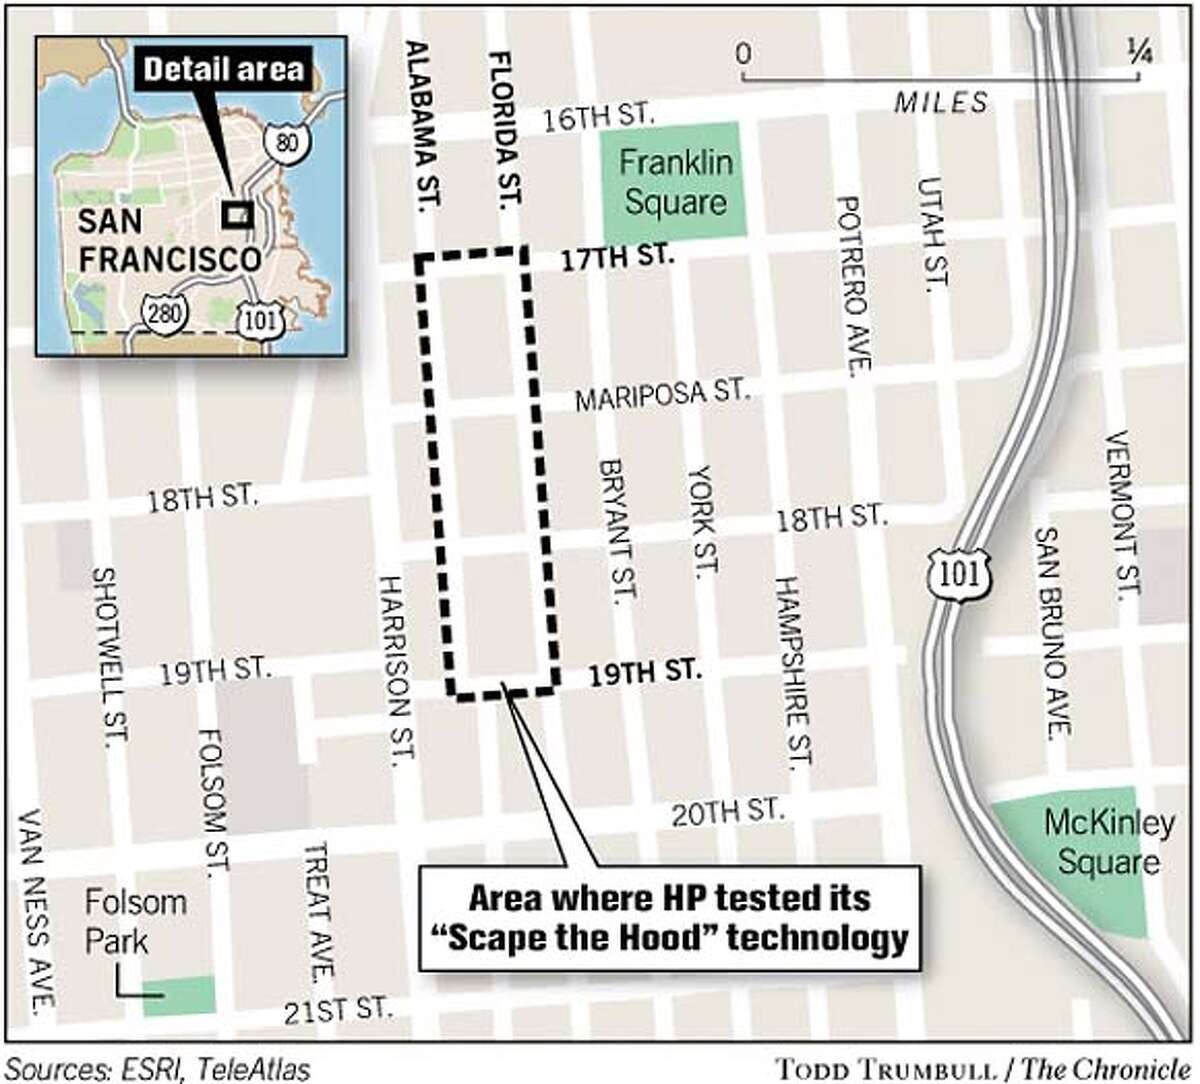 Area Where HP Tested Its "Scrape the Hood" Technology. Chronicle graphic by Todd Trumbull